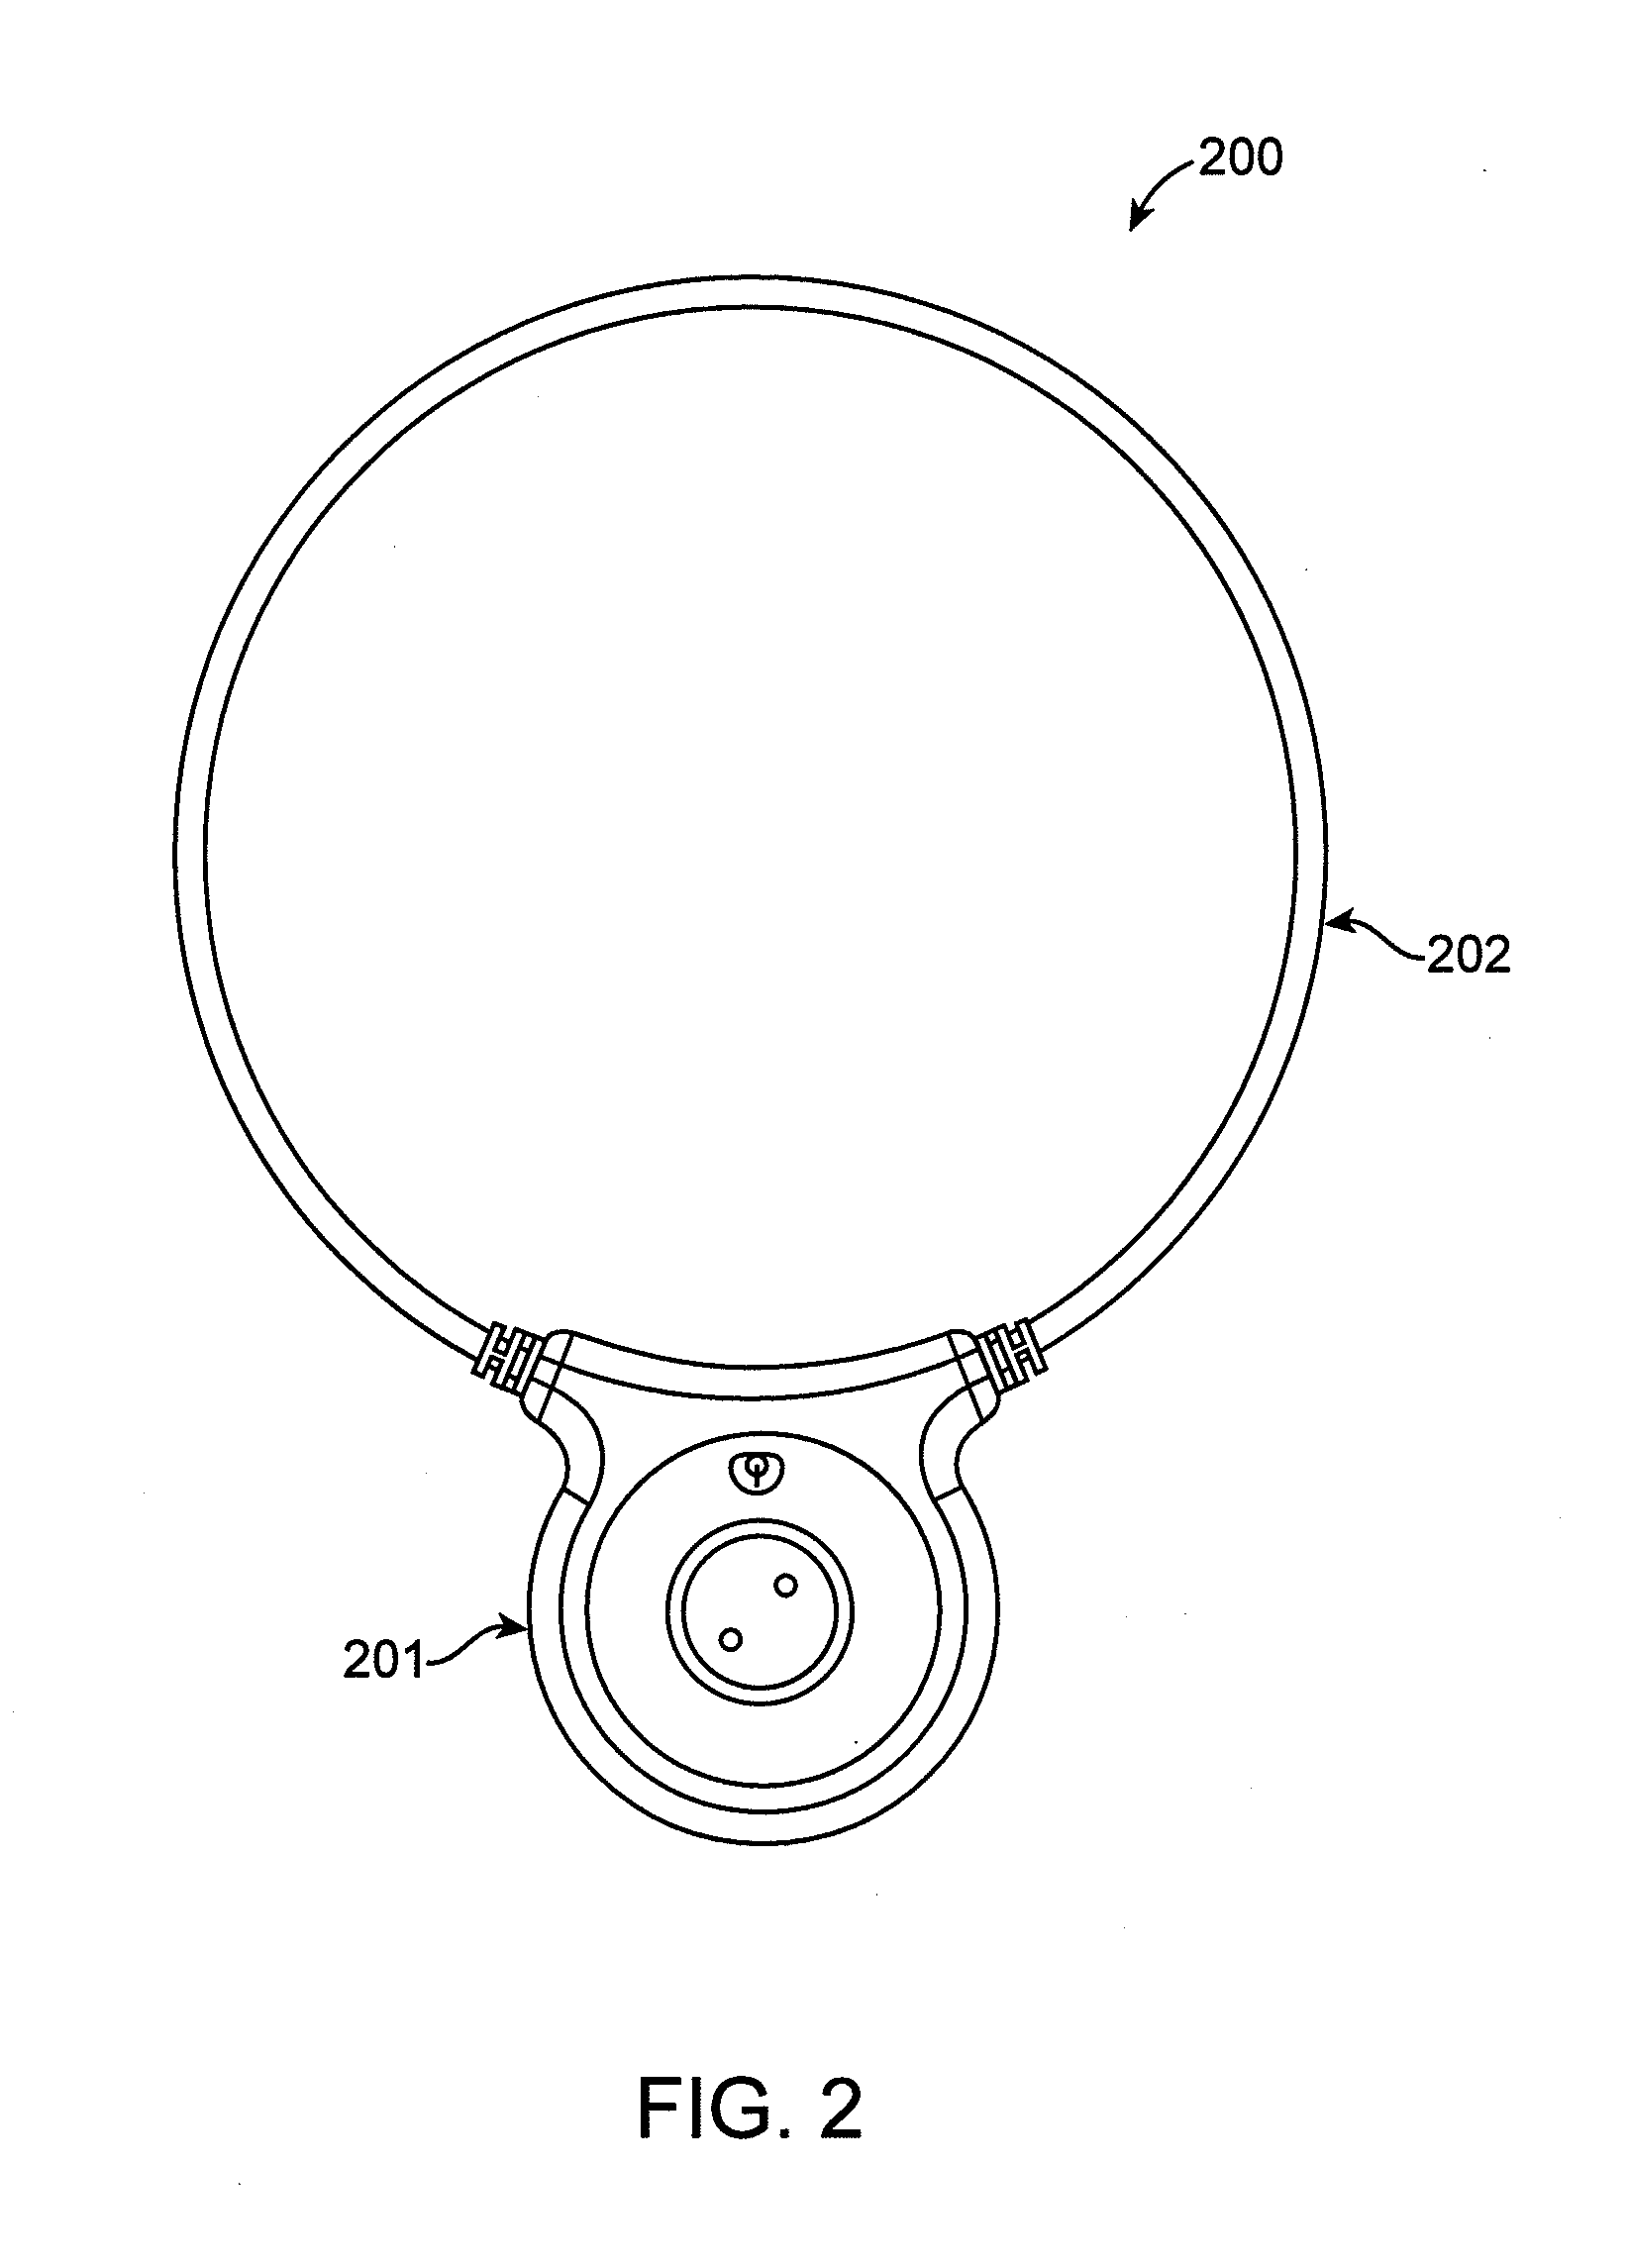 Method and apparatus for electromagnetic treatment of cognition and neurological injury